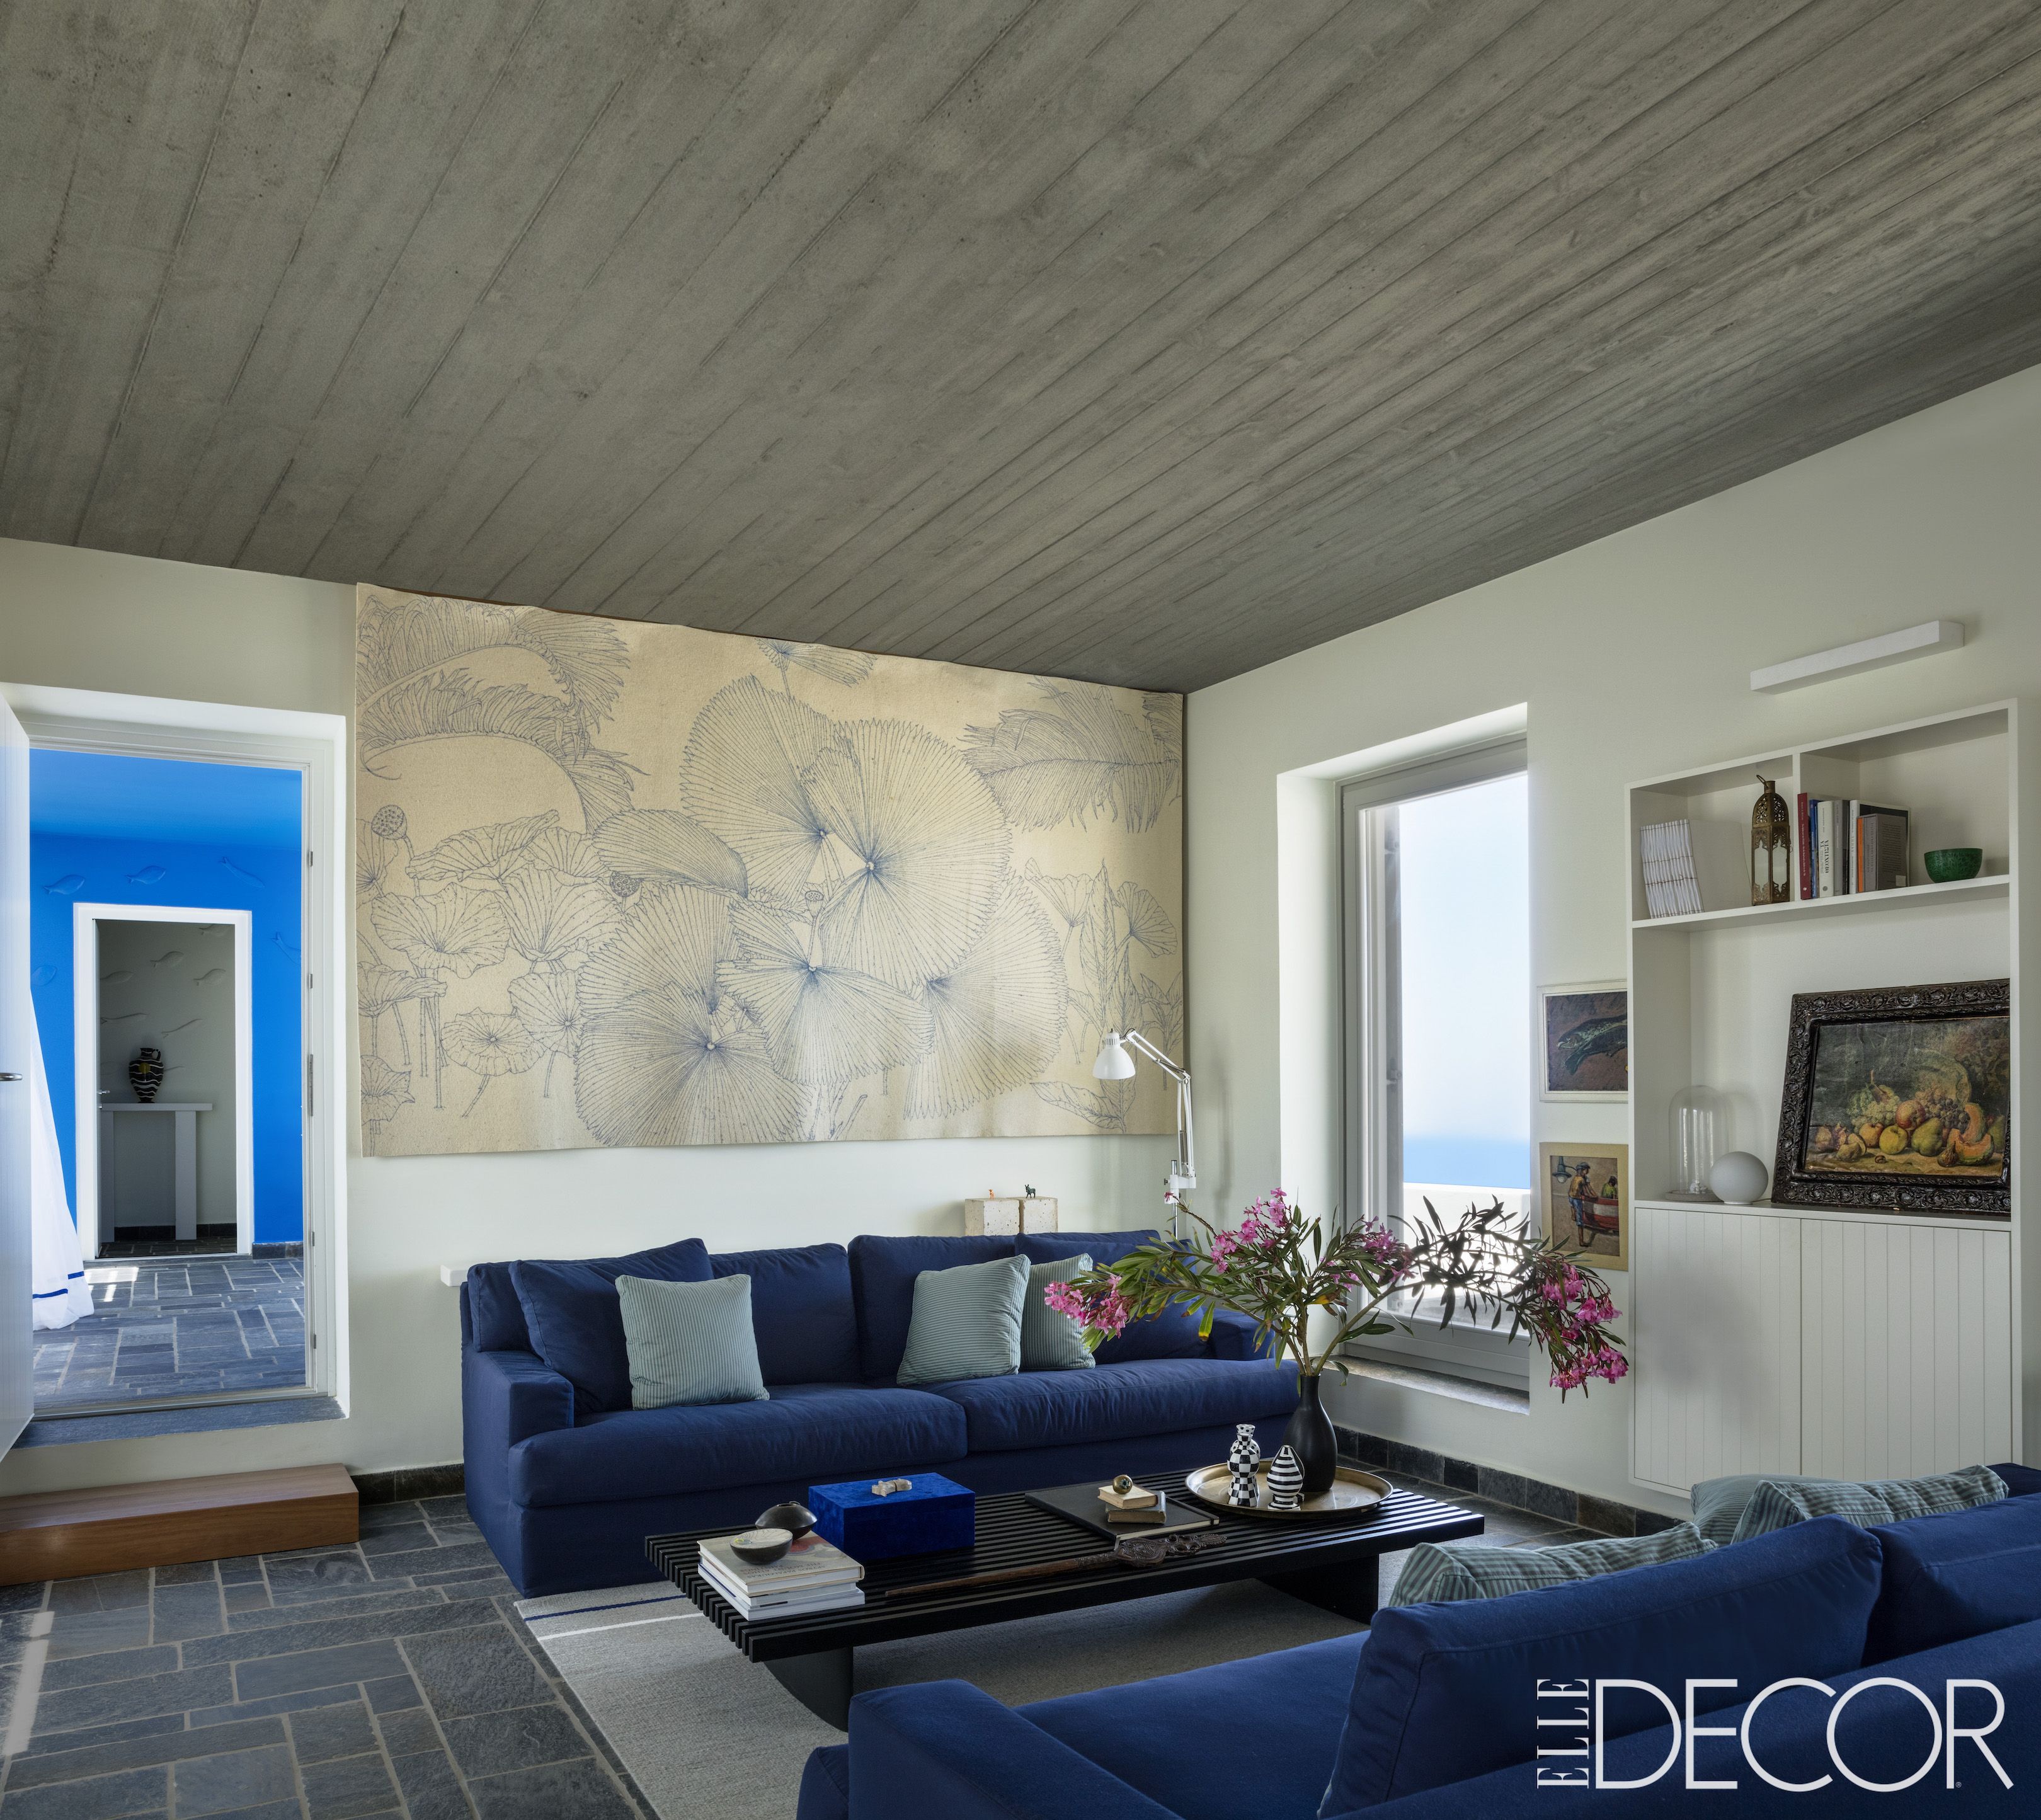 50 Blue Room Decorating Ideas How To Use Blue Wall Paint